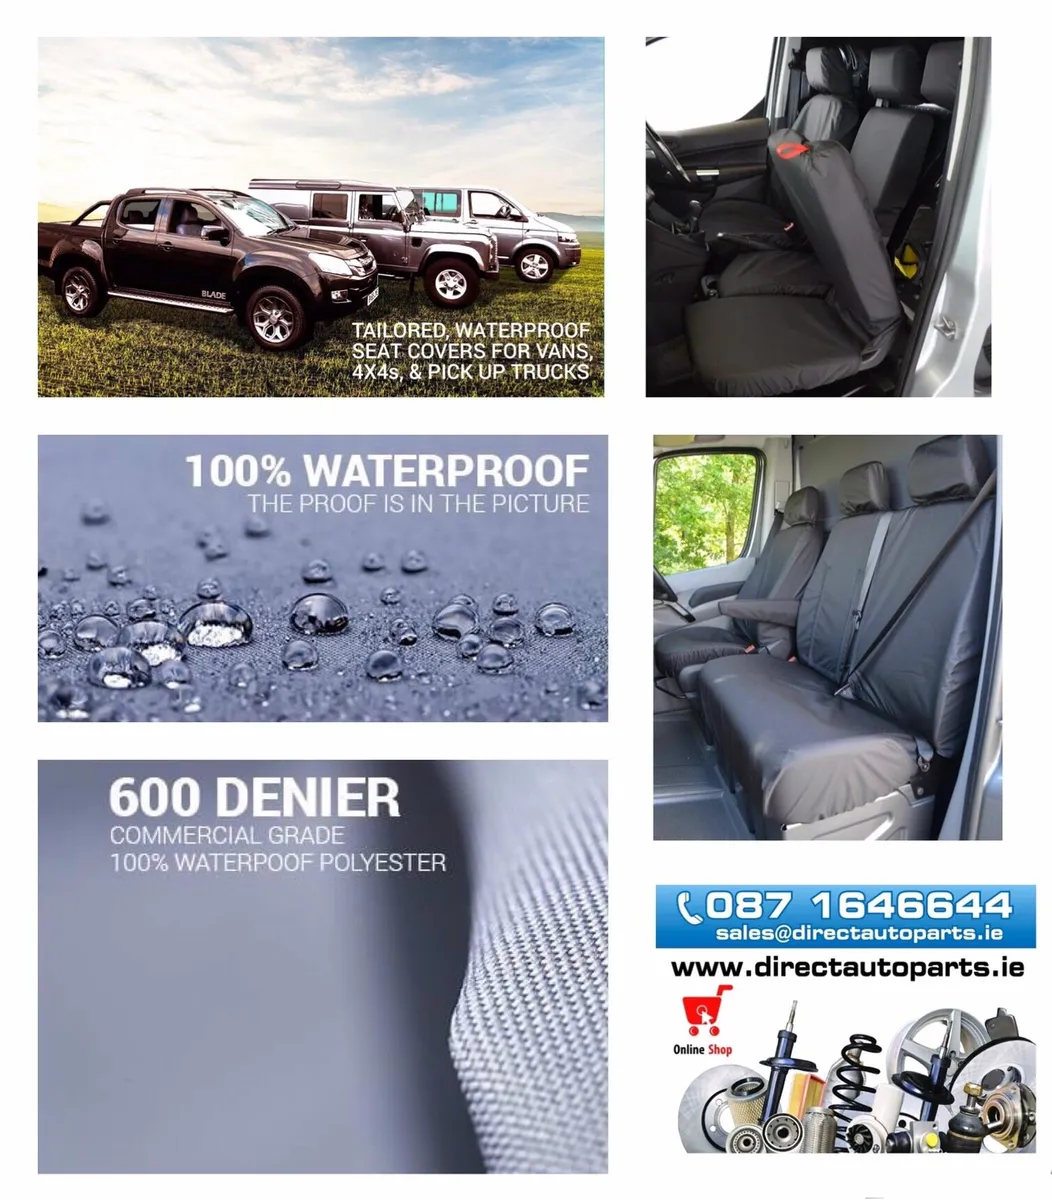 Fitted Van Seat Covers 👉DirectAutoParts.ie - Image 1